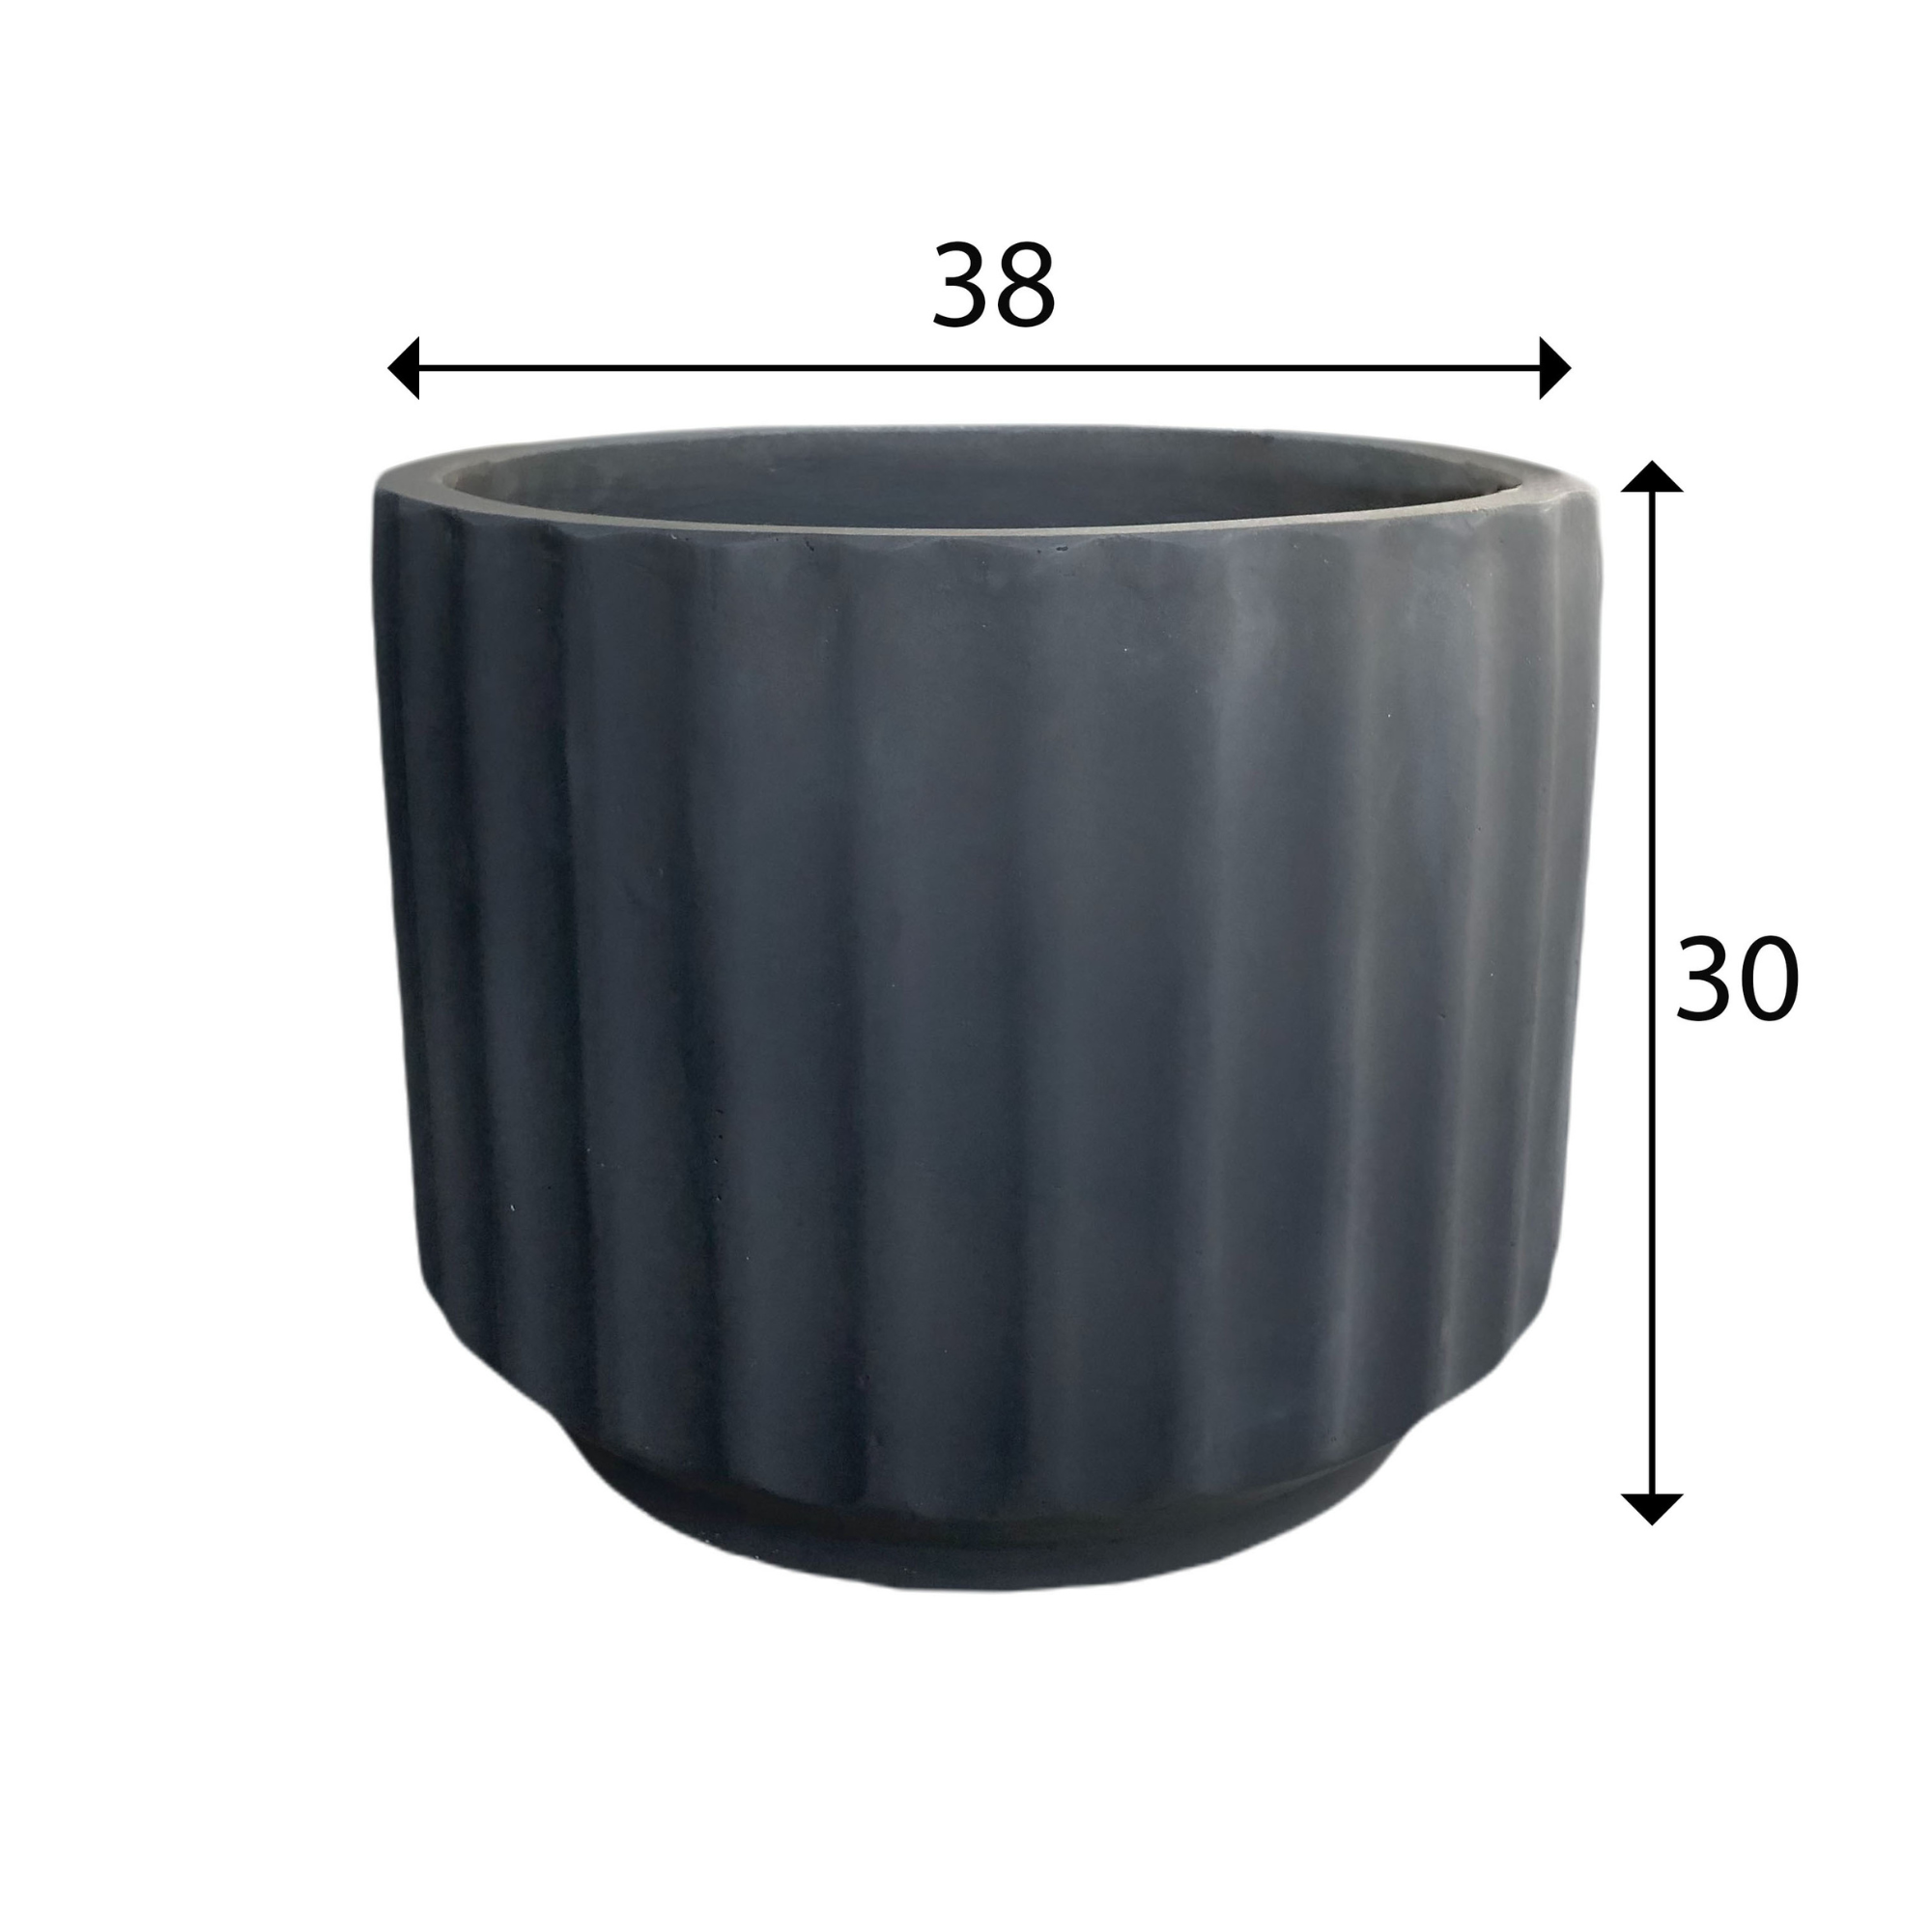 Black Wash Indoor/Outdoor Plant Pot By Roots32W*32D*26H. (8785201332545)